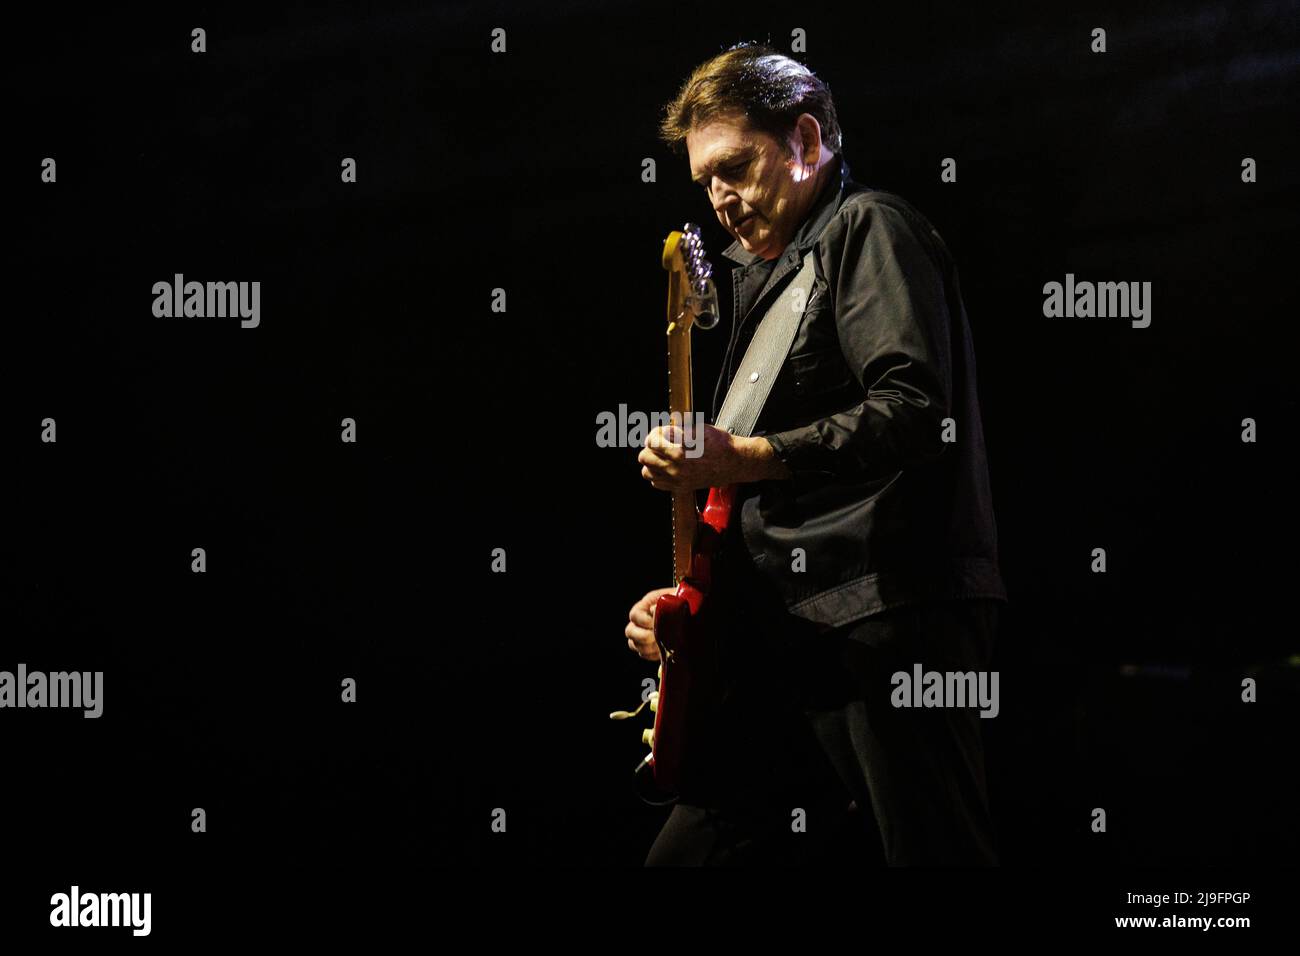 Copenhagen, Denmark. 21st, May 2022. The Scottish rock band Simple Minds  performs a live concert at KB Hallen at Frederiksberg, Copenhagen. Here  guitarist Charlie Burchill is seen live on stage. (Photo credit: